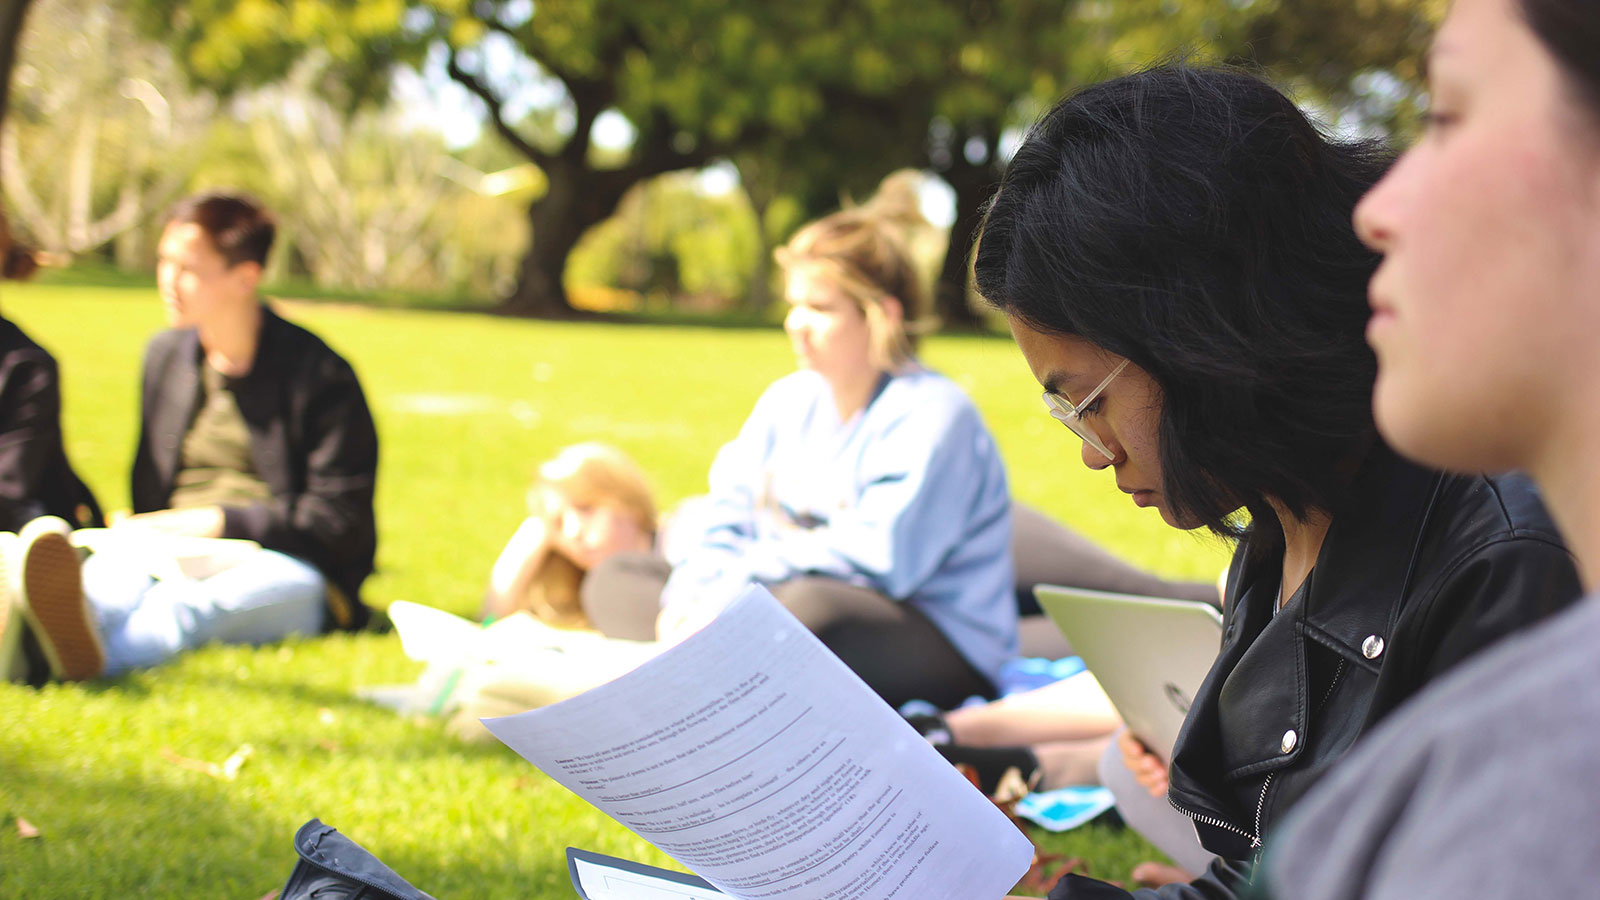 English students reading outside on campus